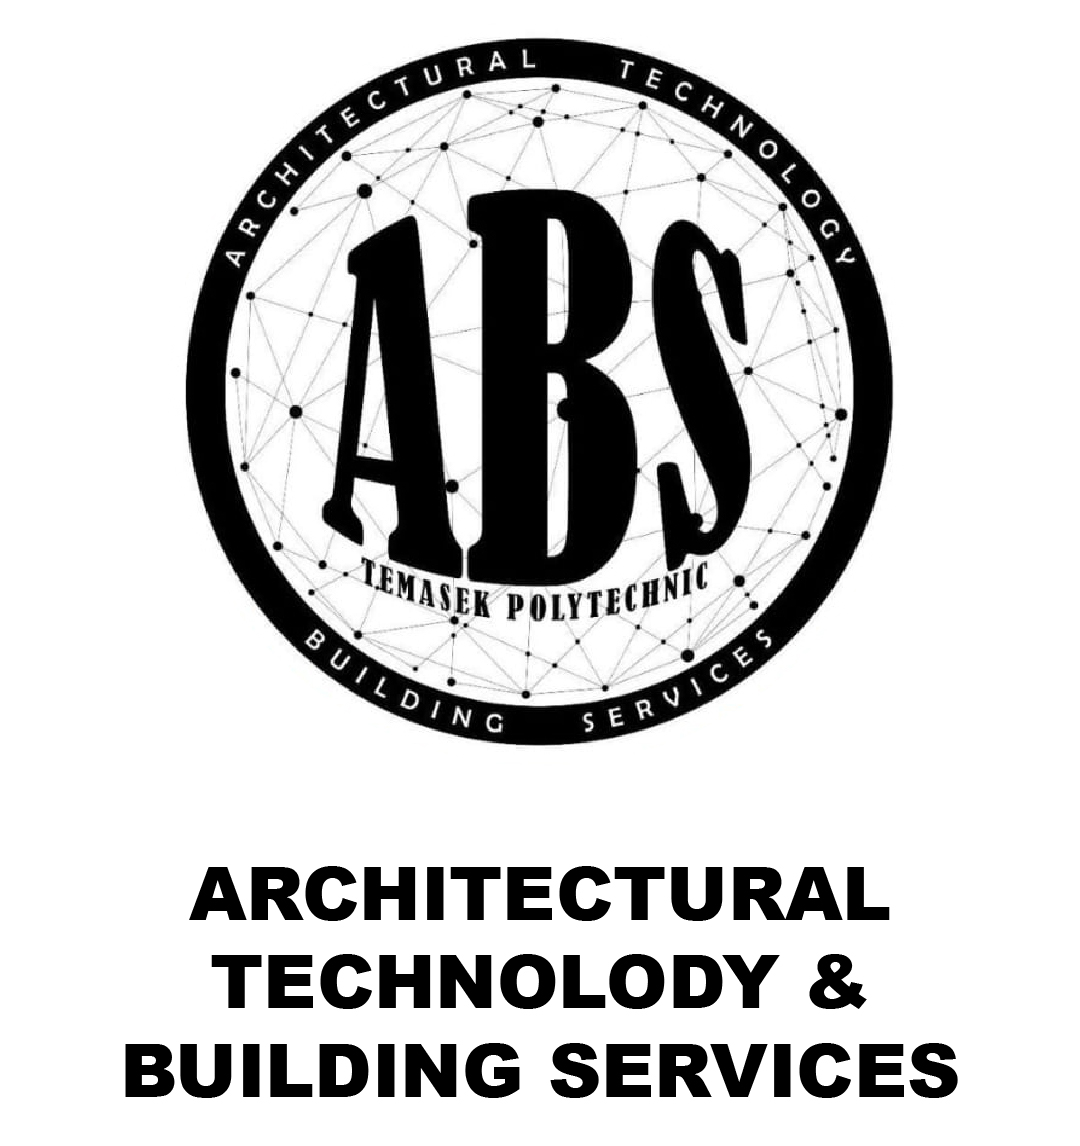 Architectural Technology & Building Services (ABS)